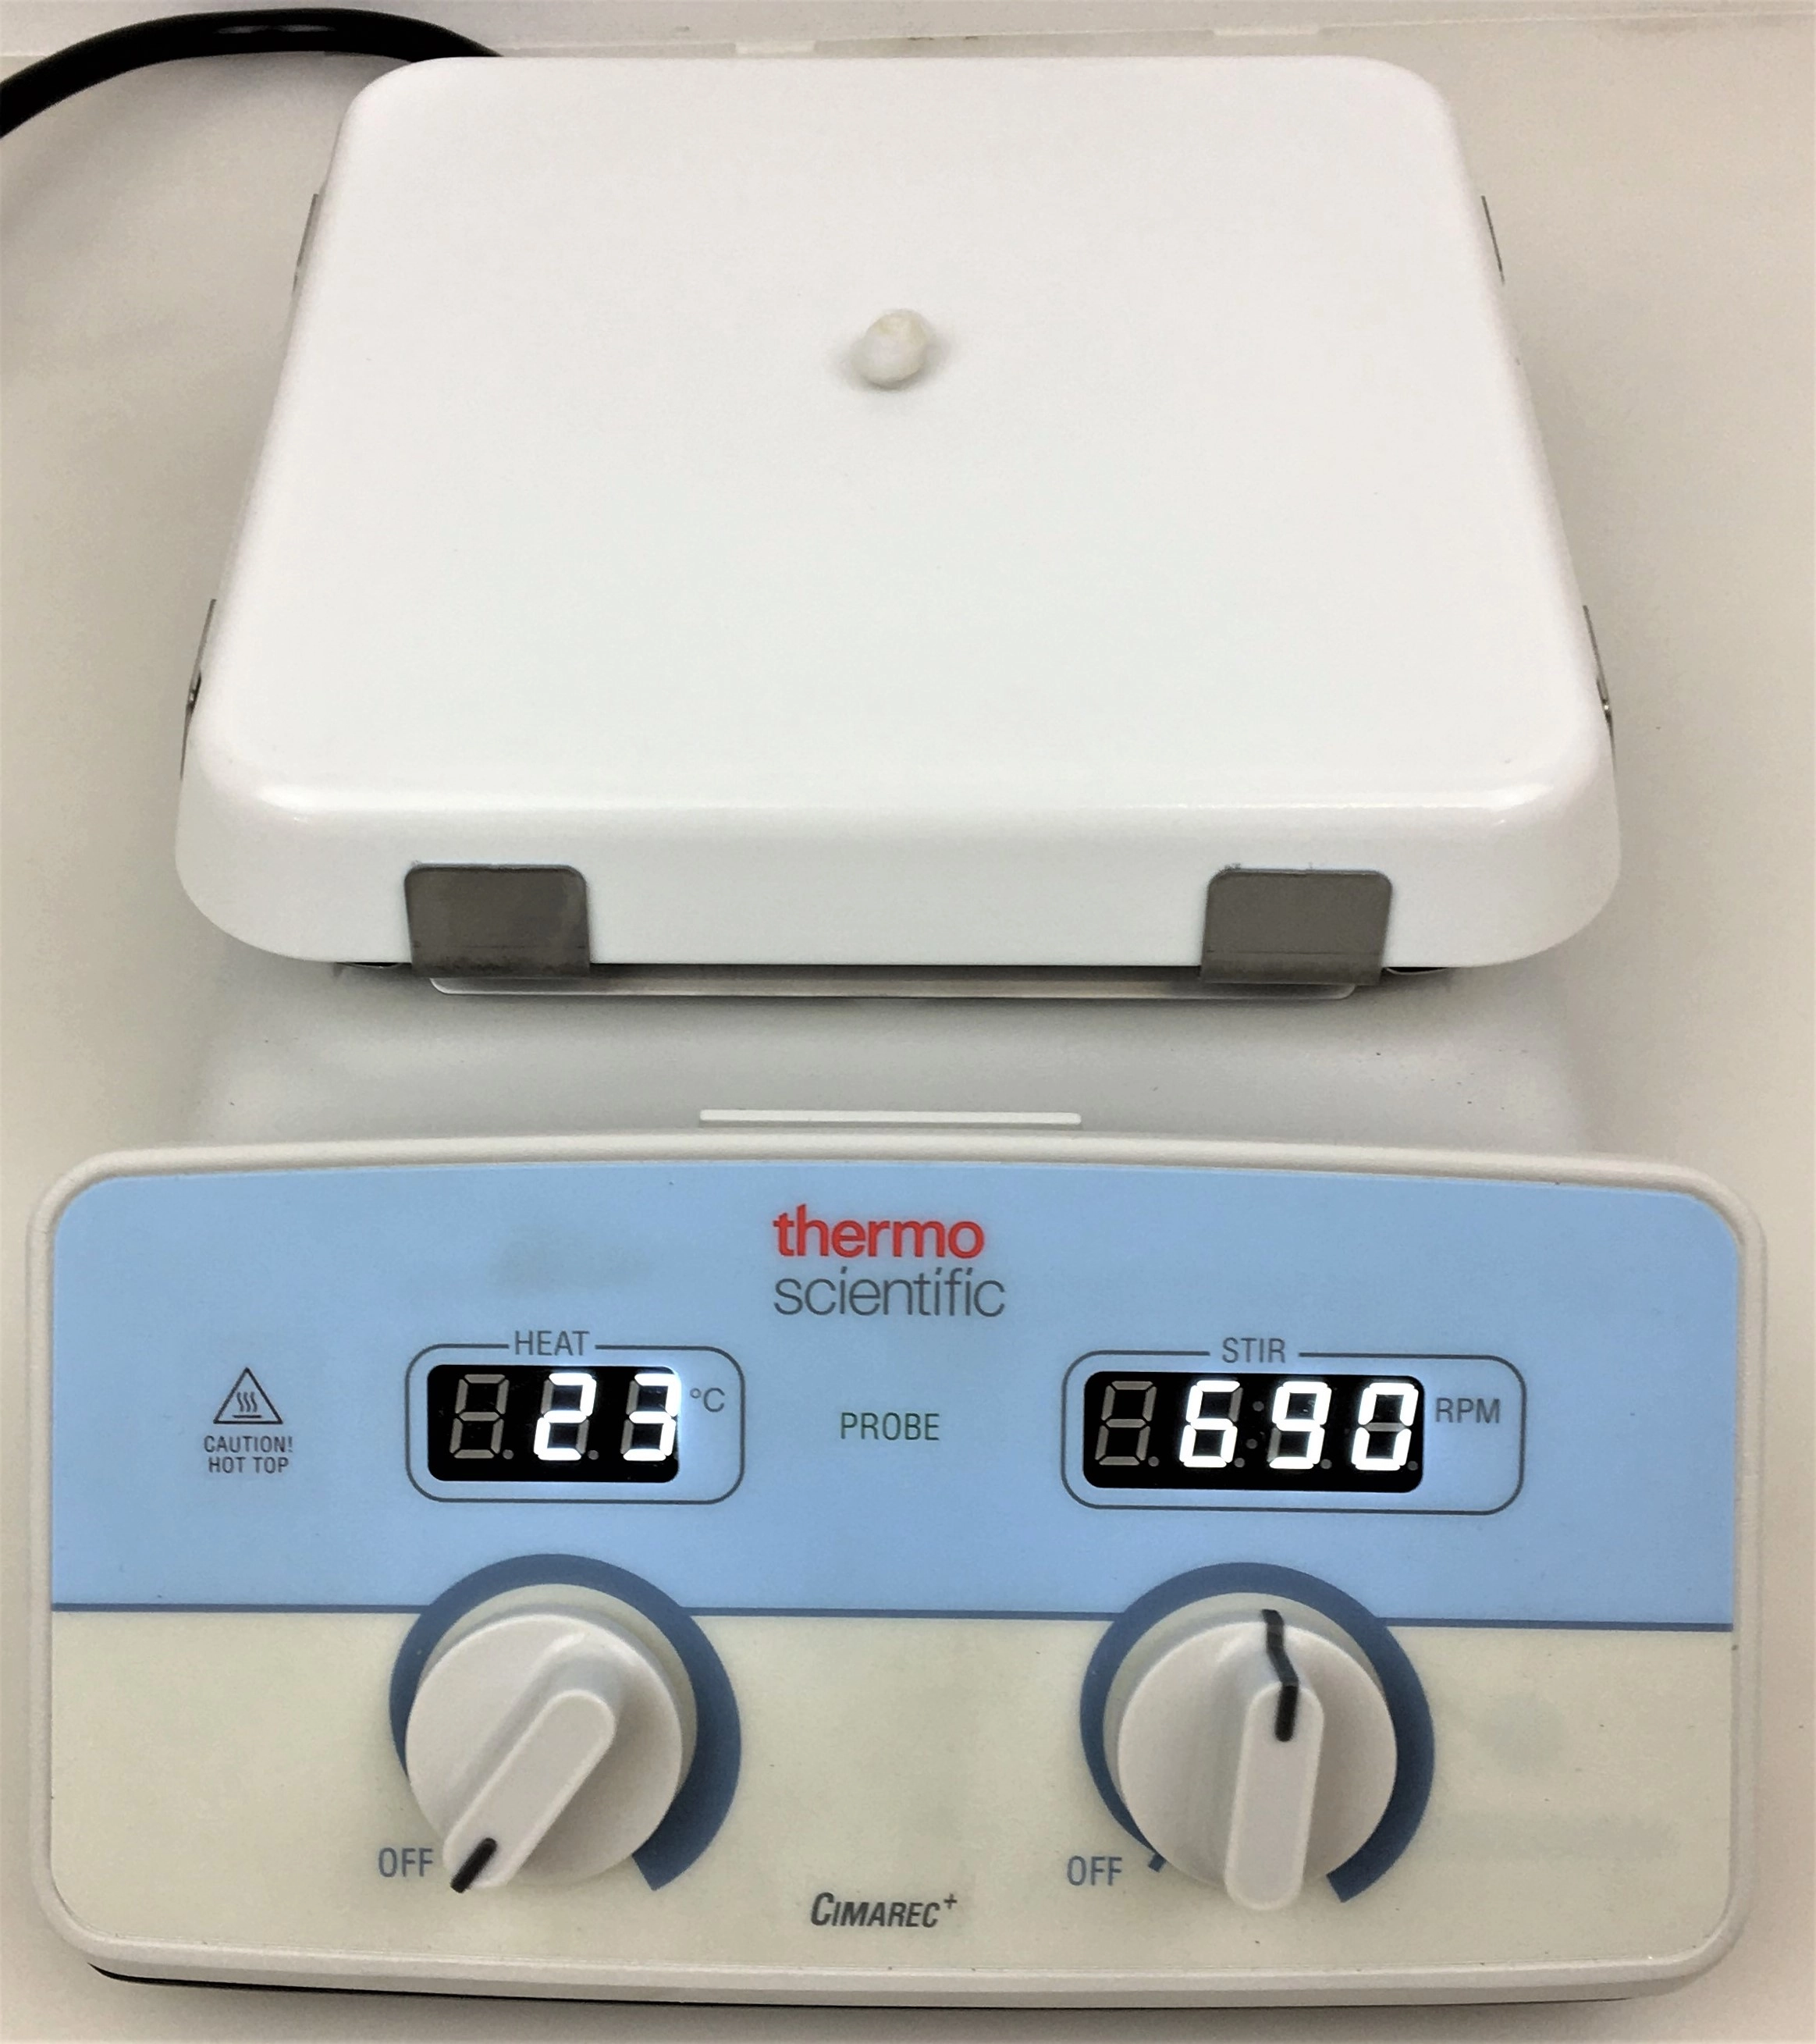 Thermo Cimarec+ SP88857100 Digital Stirring Hot Plate - 7.25" x 7.25" Plate